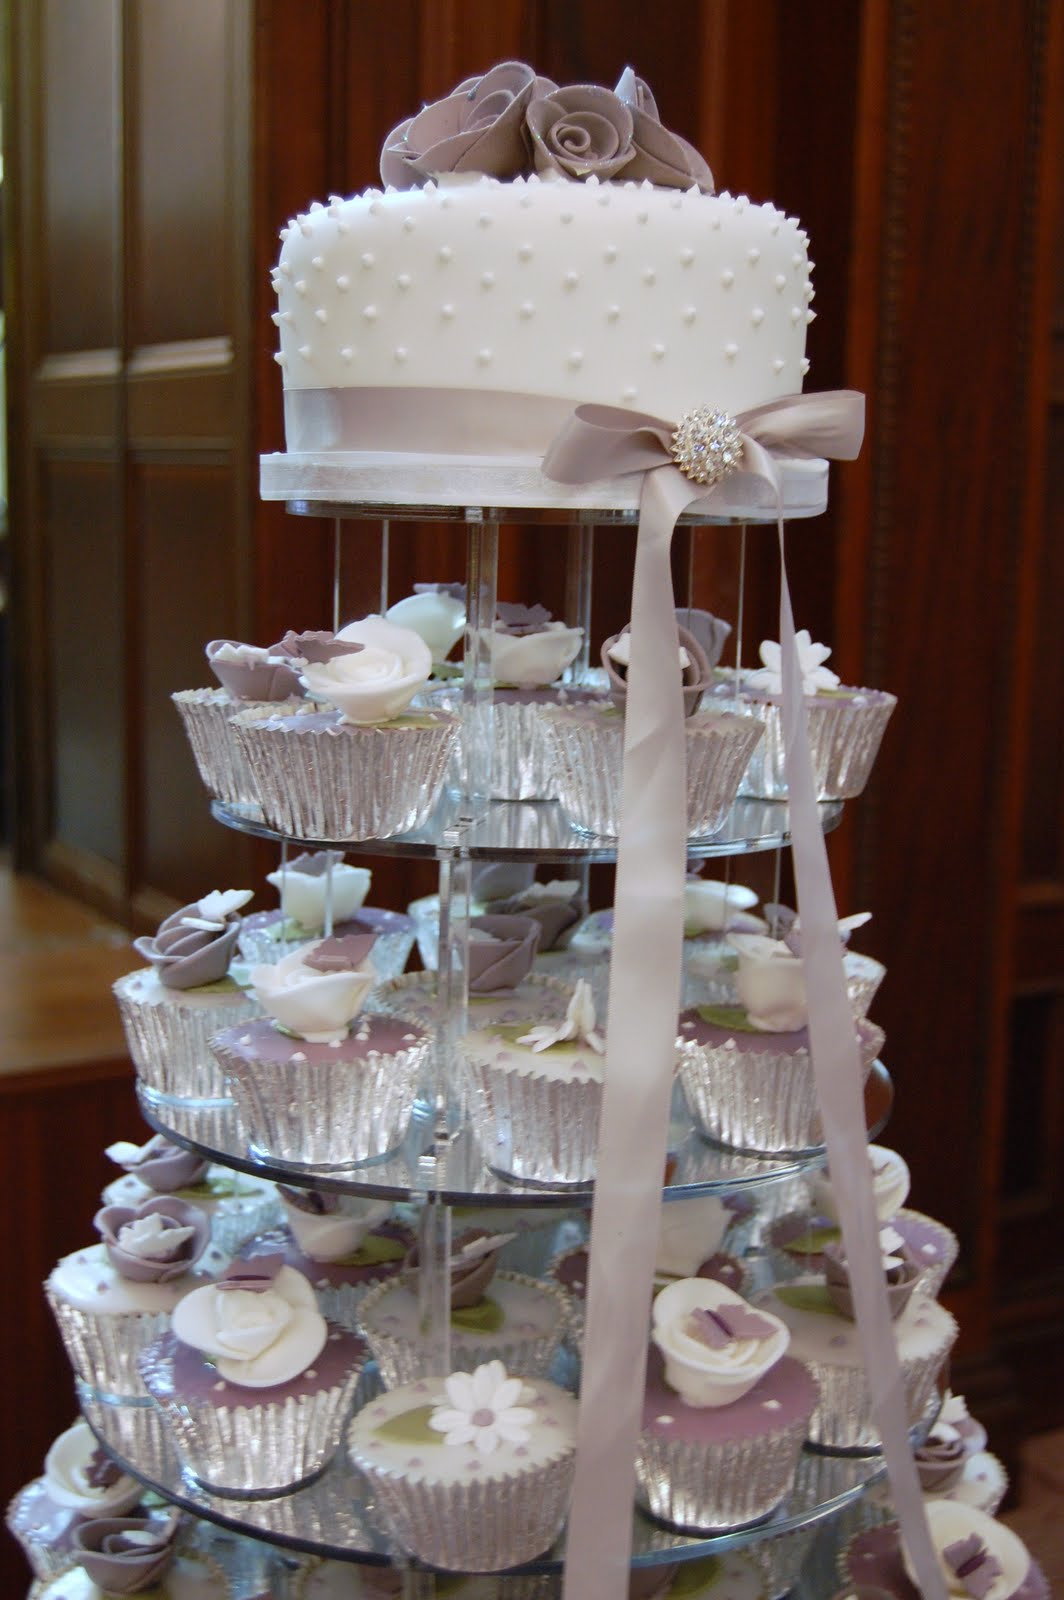 Most Wedding Cakes For The Holiday Cupcake Wedding Cakes Cardiff